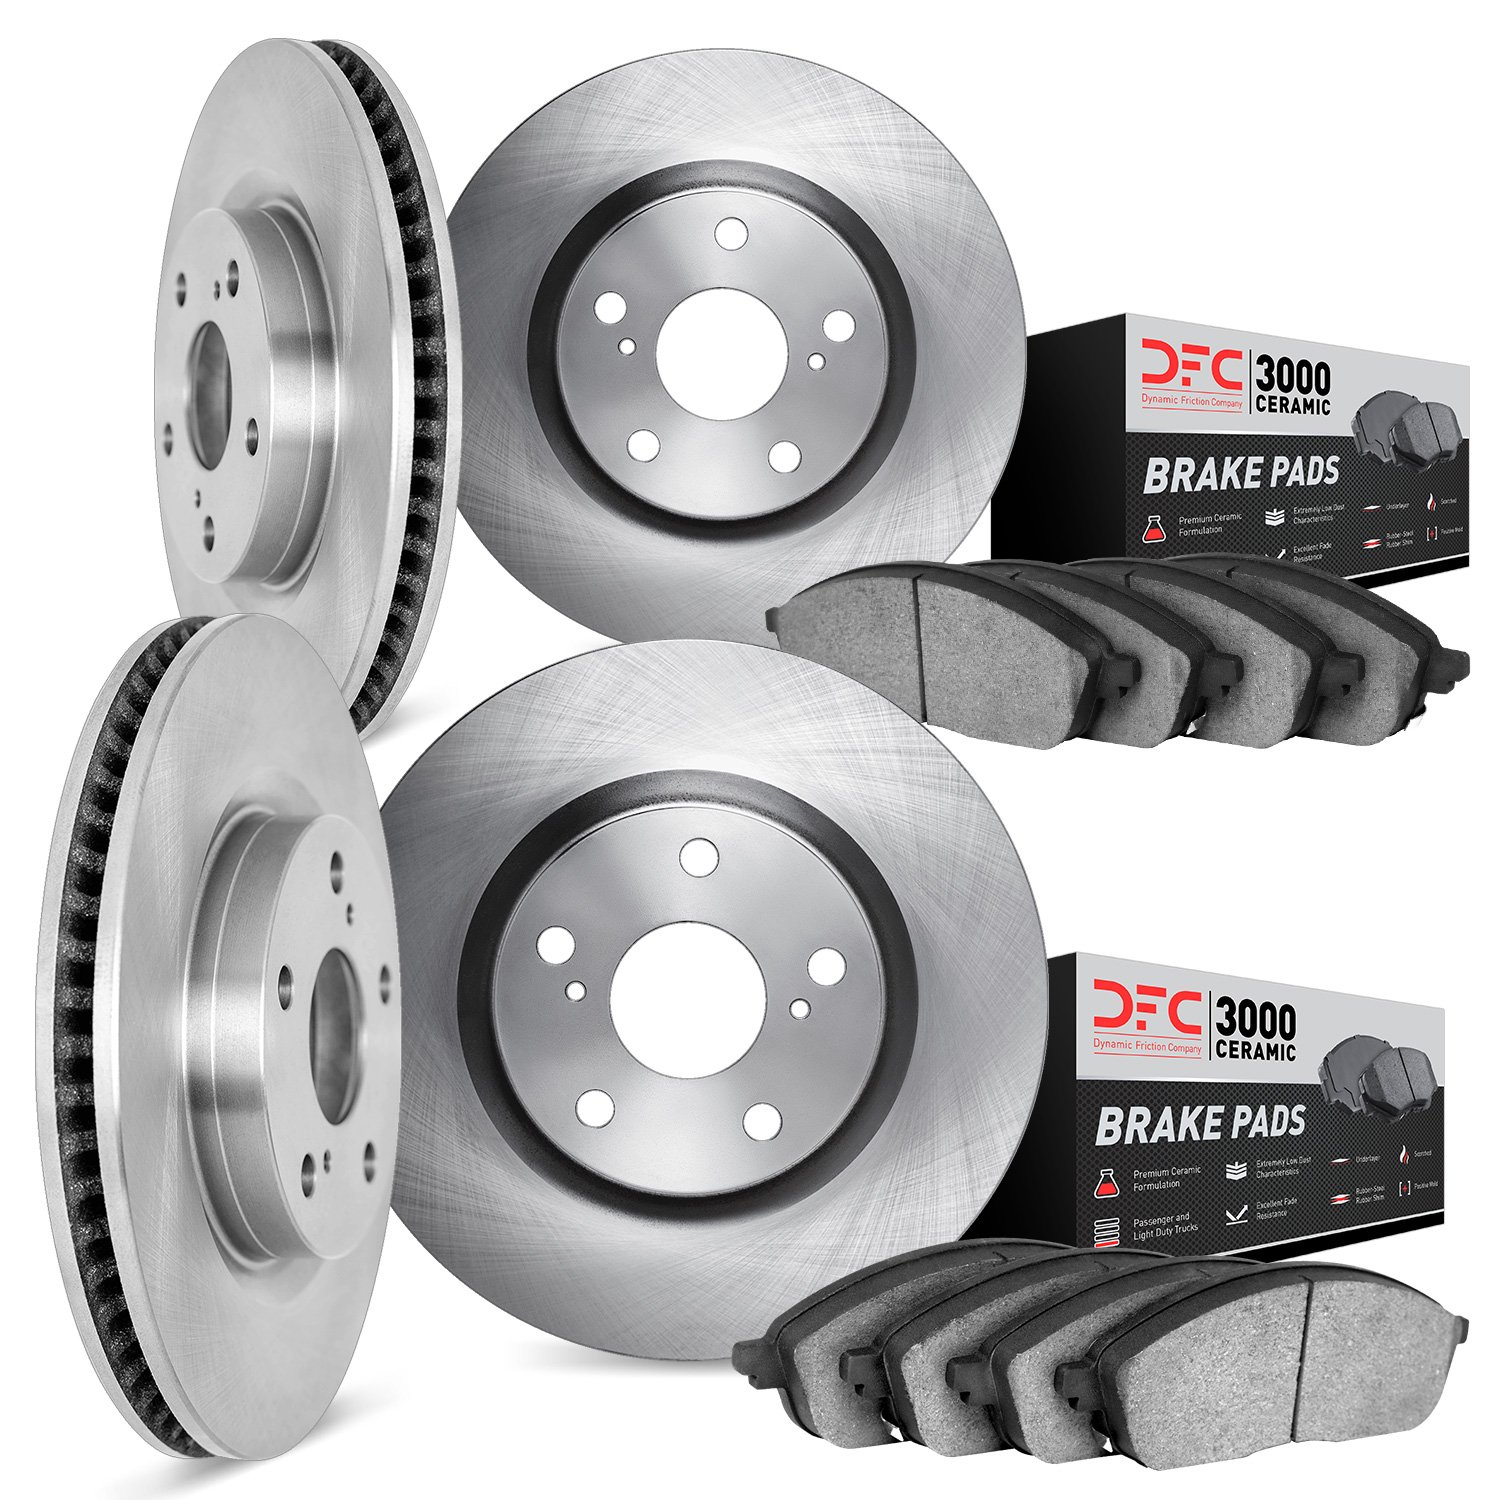 6304-31070 Brake Rotors with 3000-Series Ceramic Brake Pads Kit, 2007-2015 BMW, Position: Front and Rear